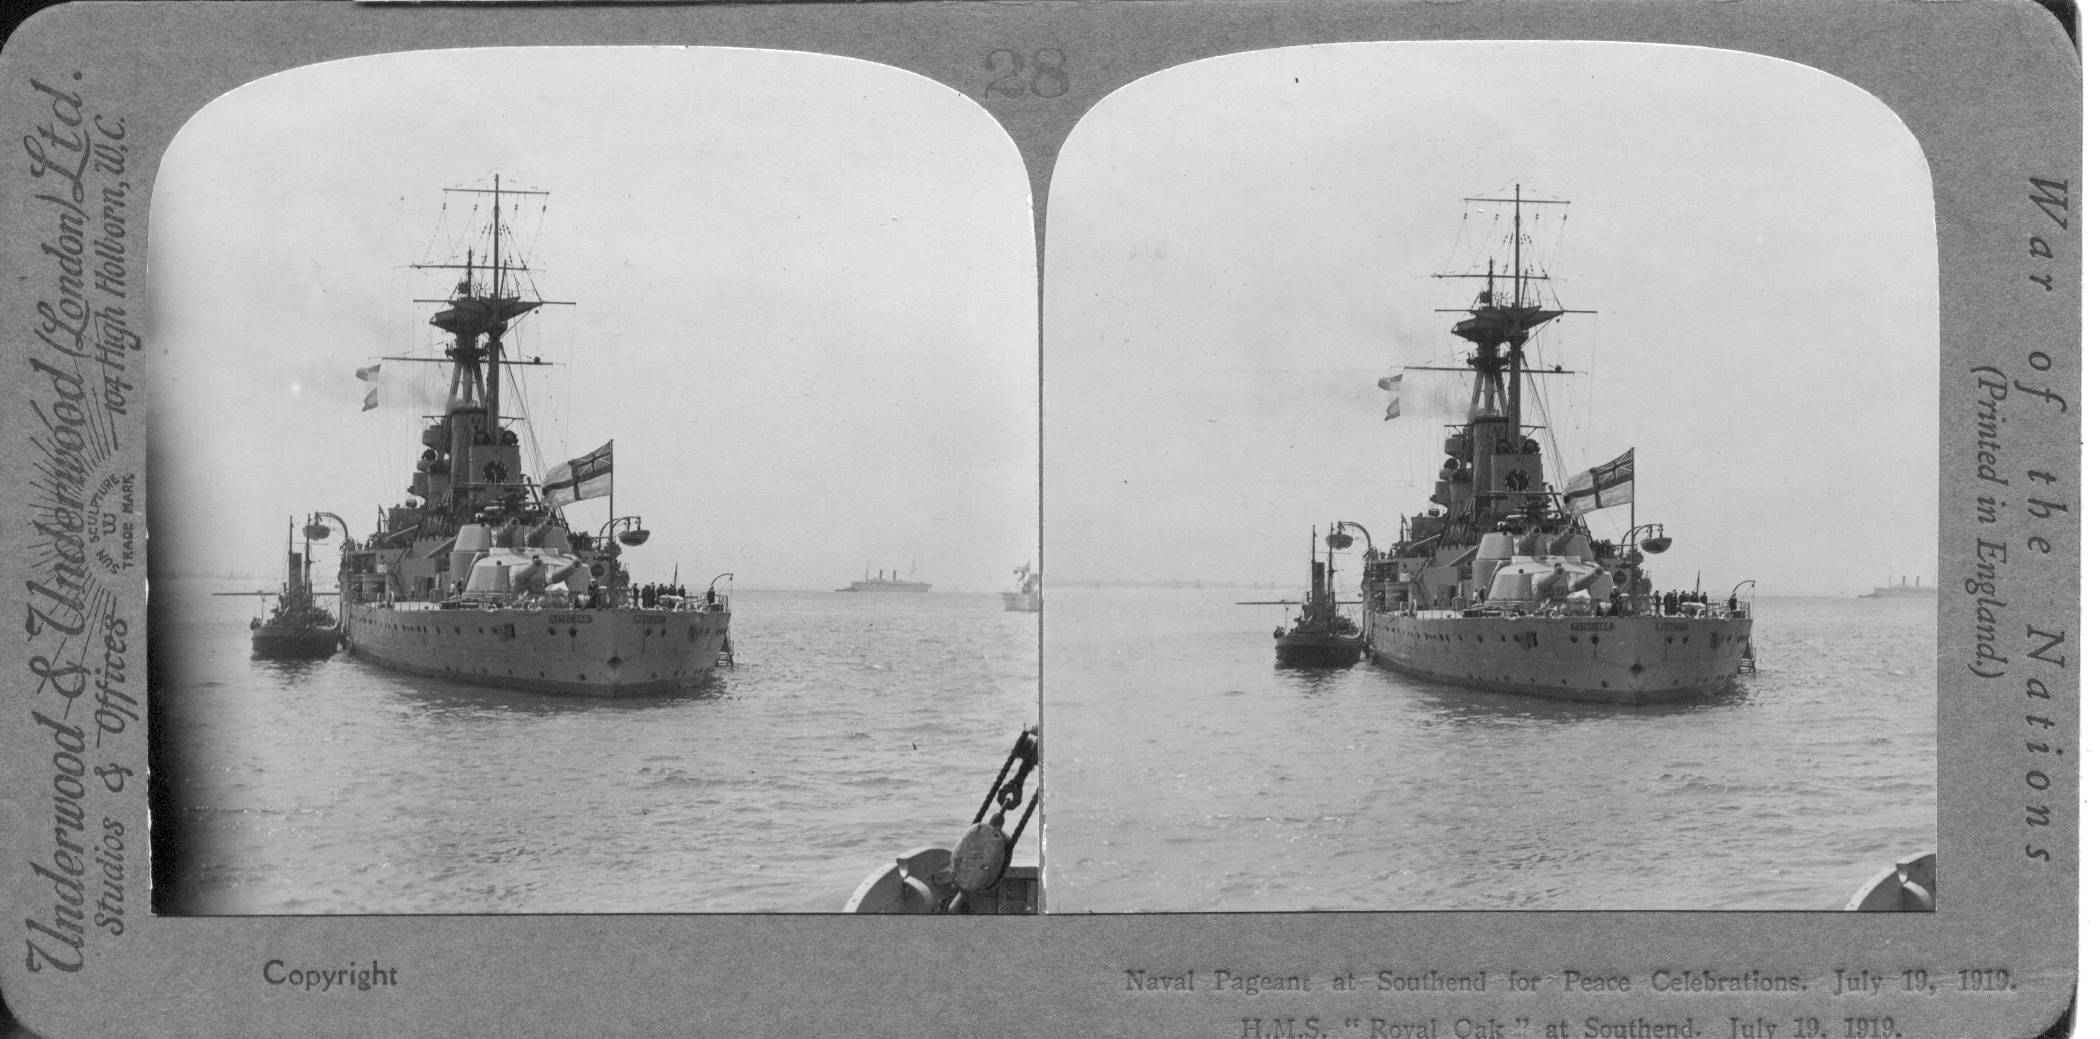 Naval Pageant at Southend for Peace Celebrations. July 19, 1919. H.M.S. "Royal oak" at Southend.